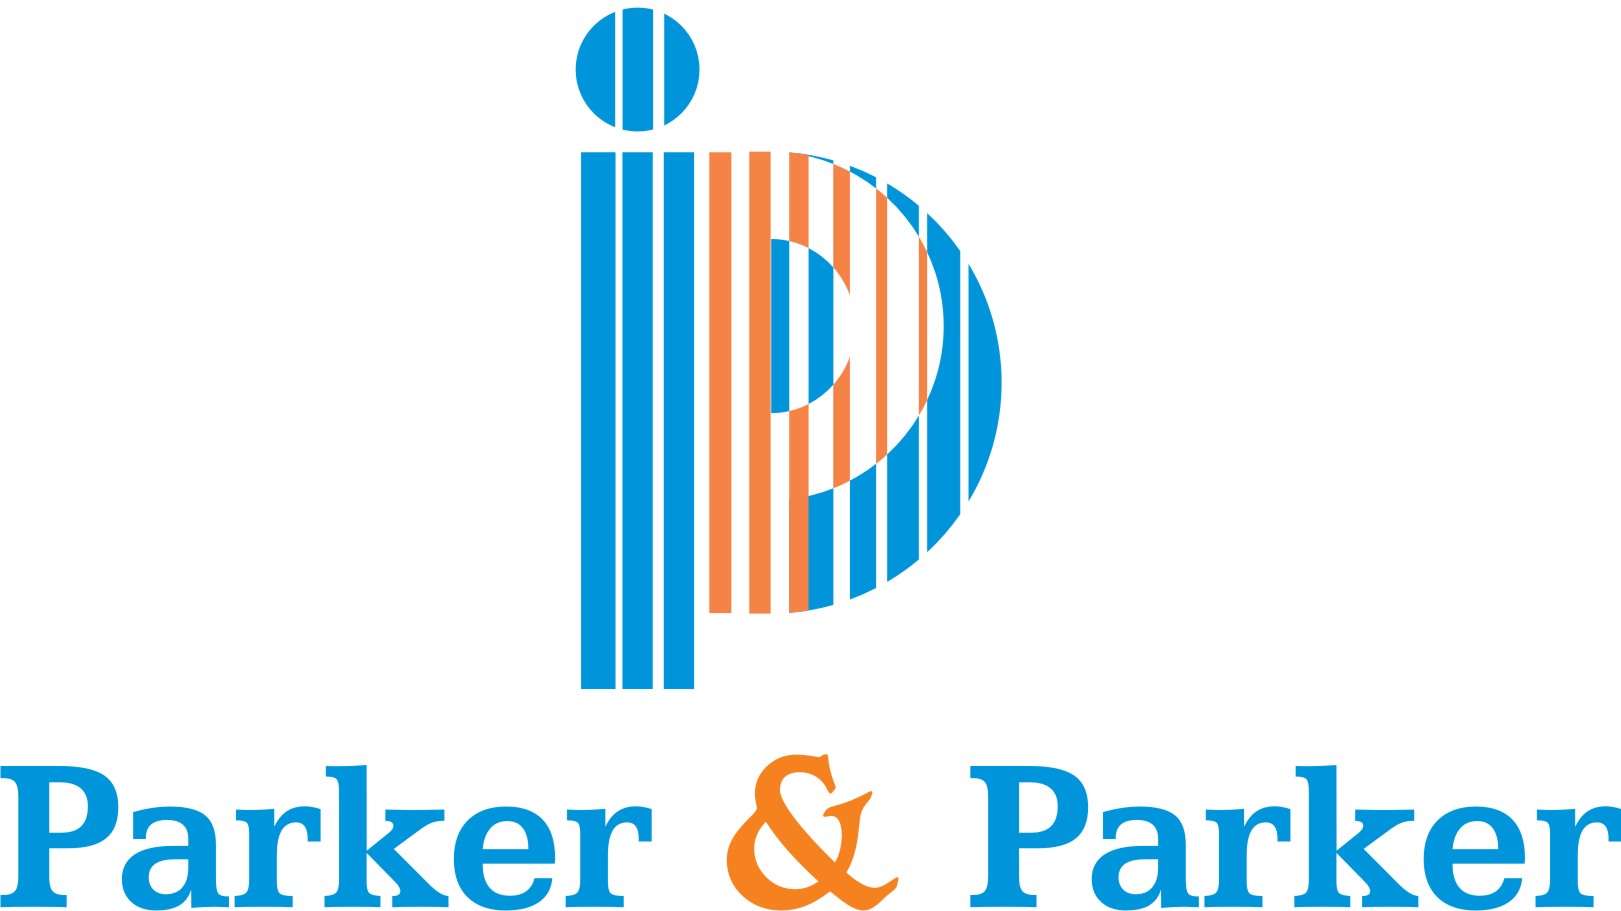 Parker & Parker Company - Patent and Trademark Attorneys - India